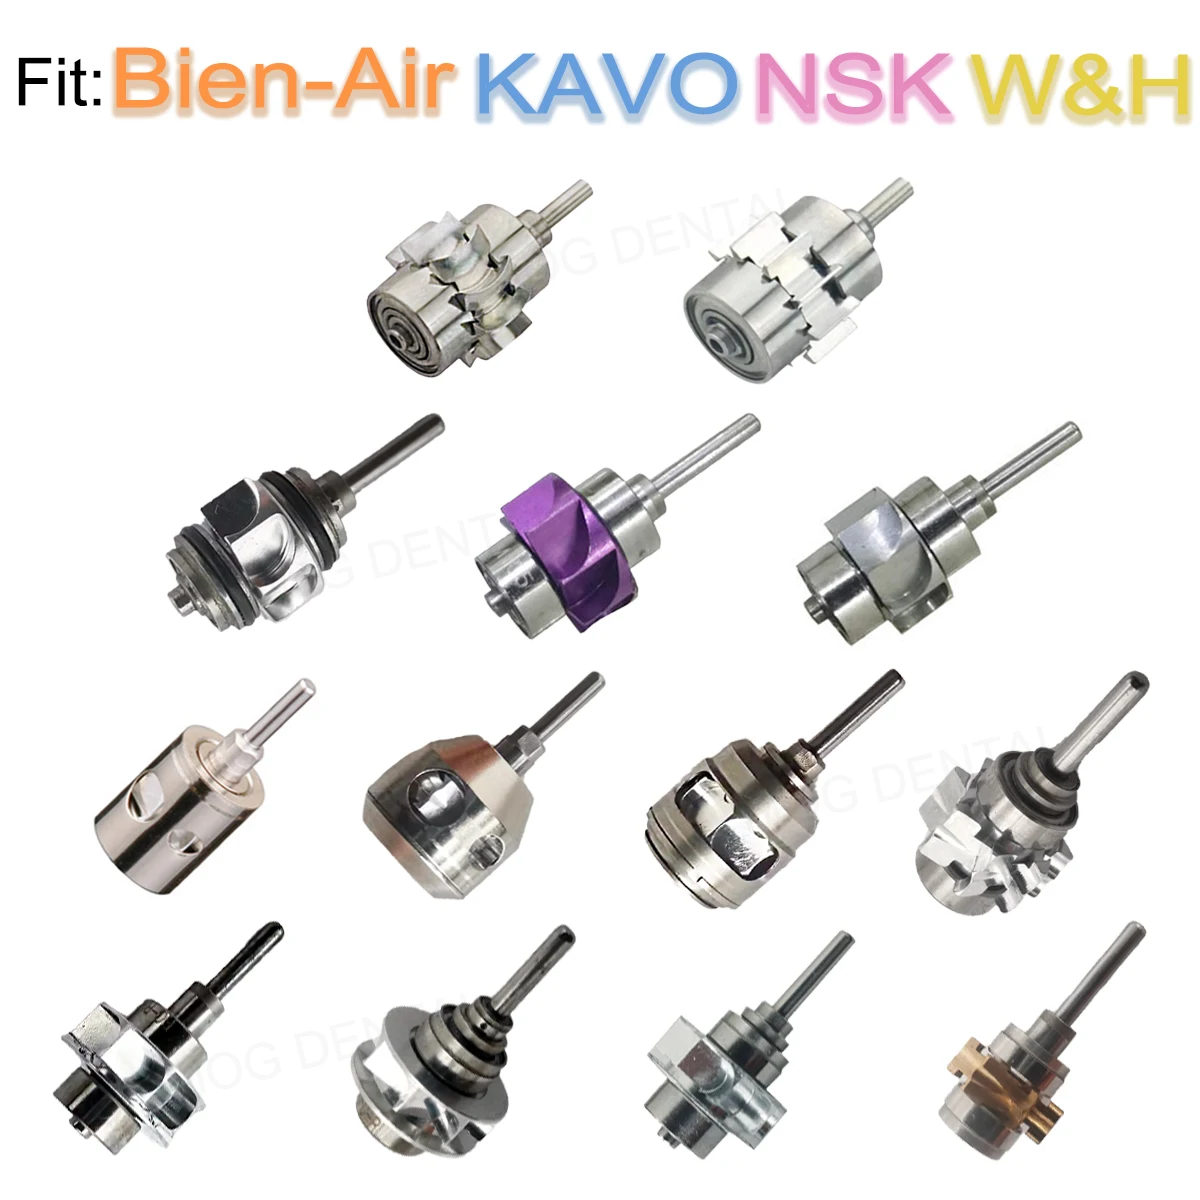 

Dental Turbine Cartridge Air Rotor For NSK WH COXO KAVO Bien-Air High Speed Handpiece Dentistry Accessories